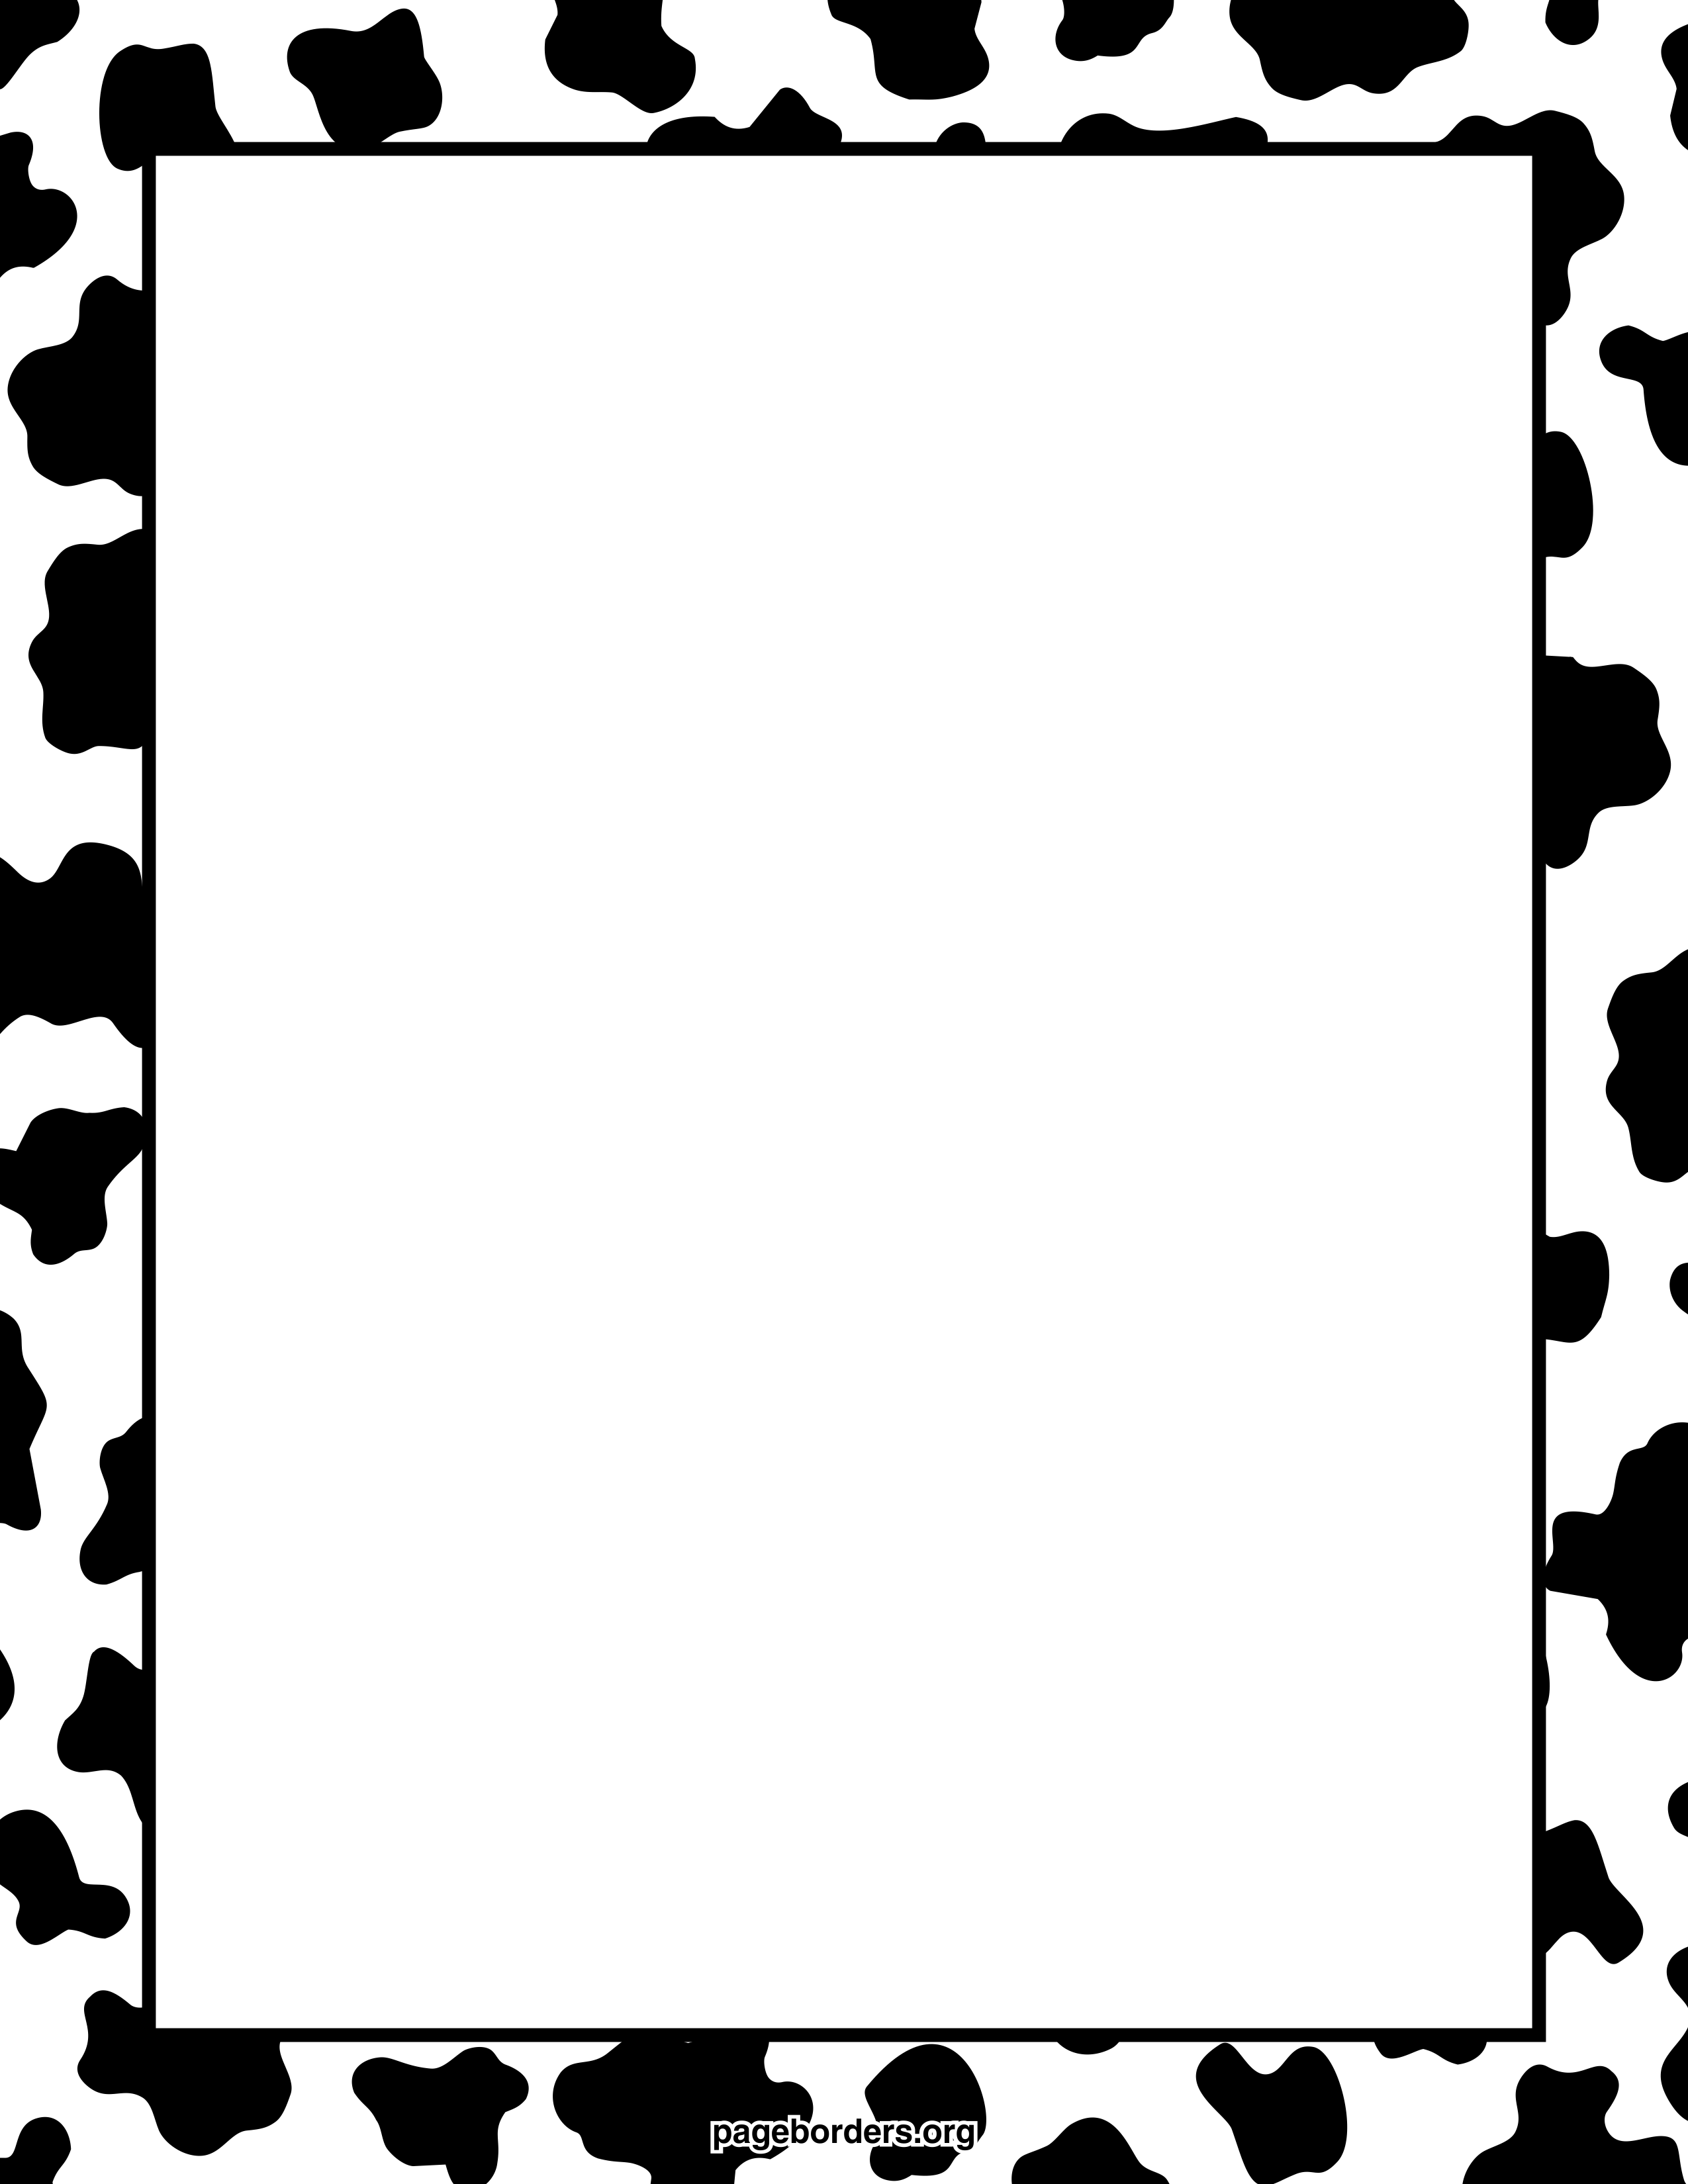 free cow clipart black and white - photo #44